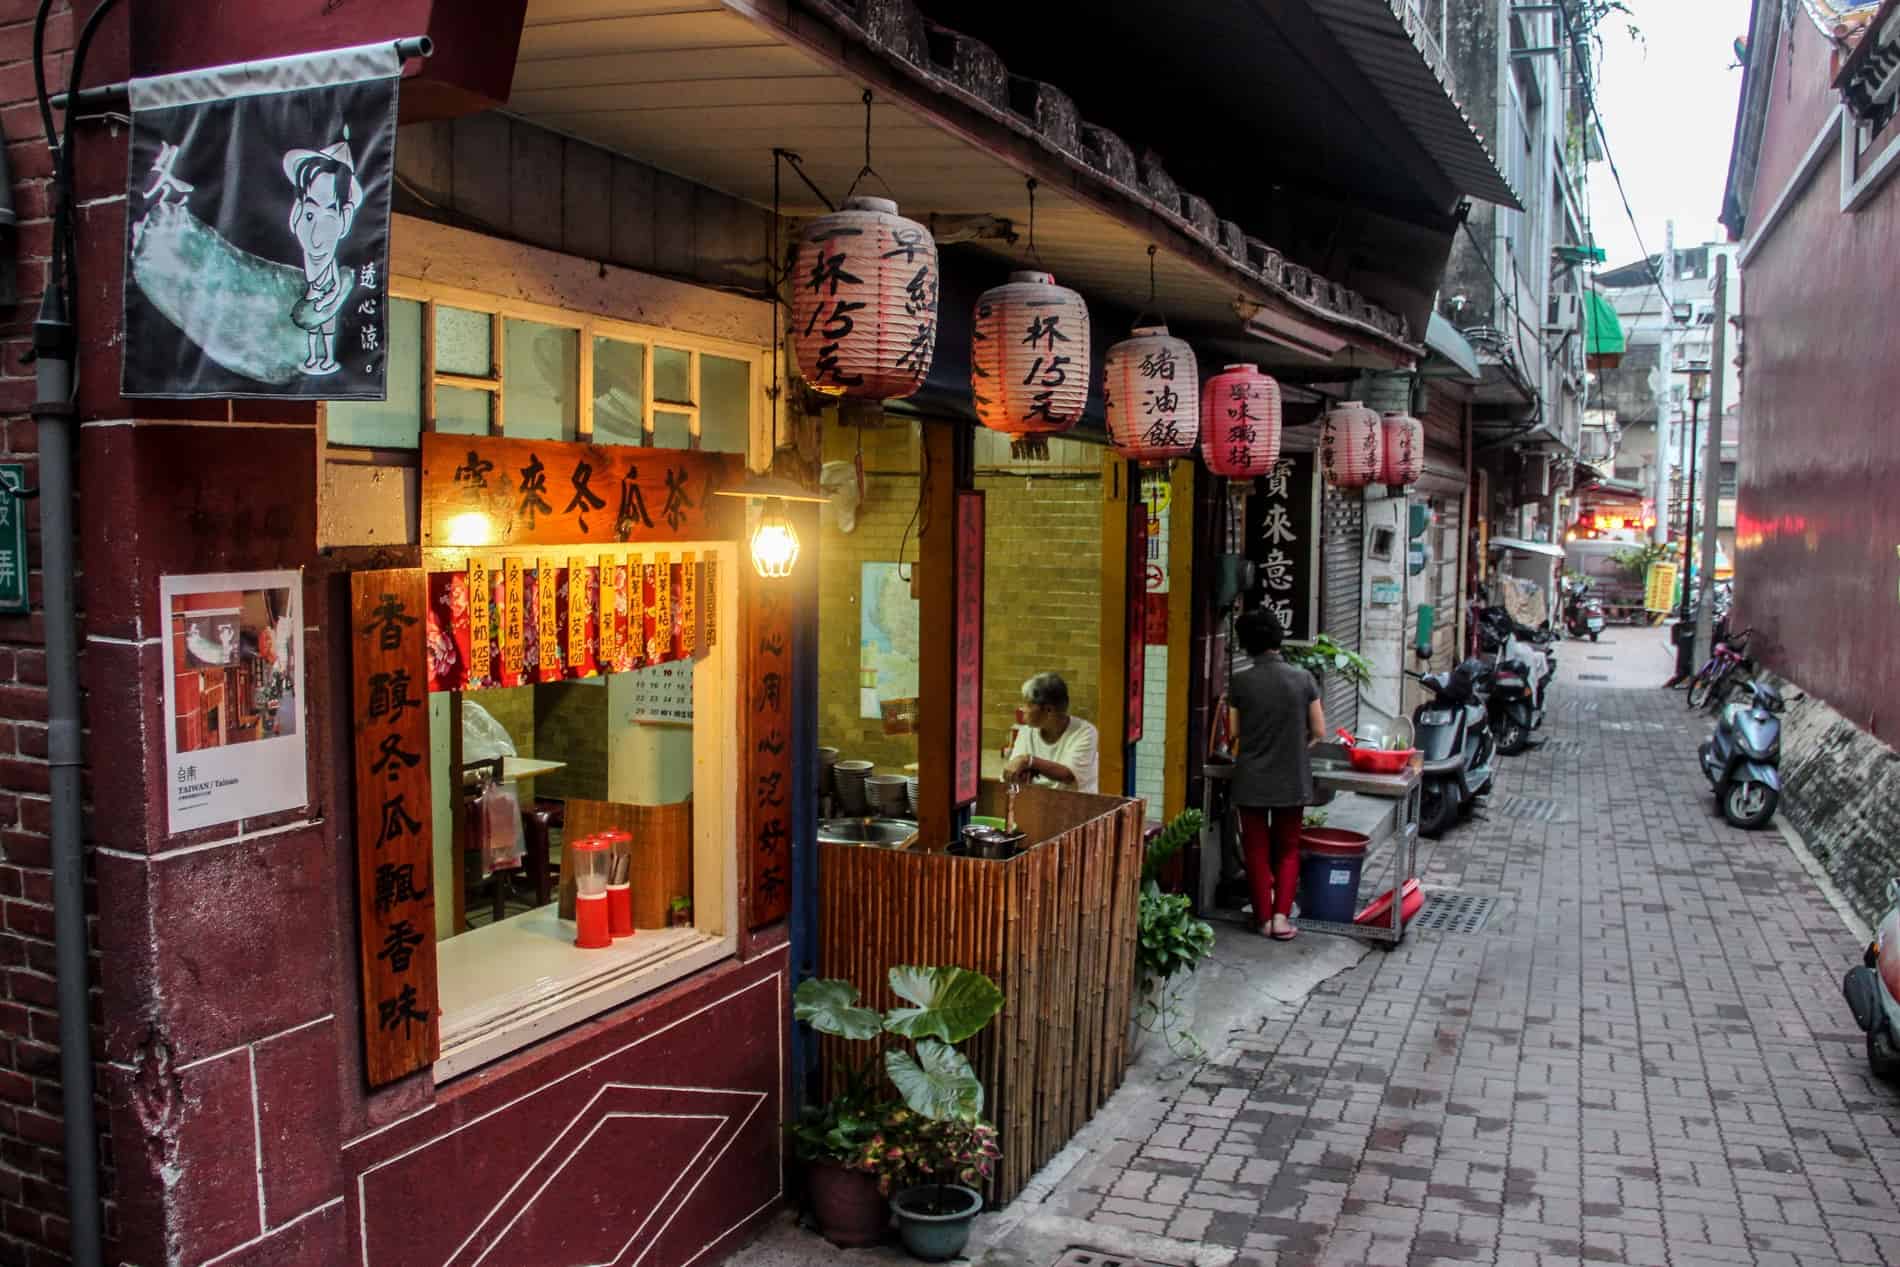 A restaurant with red lanterns on a narrow street in Tainan, Taiwan. 